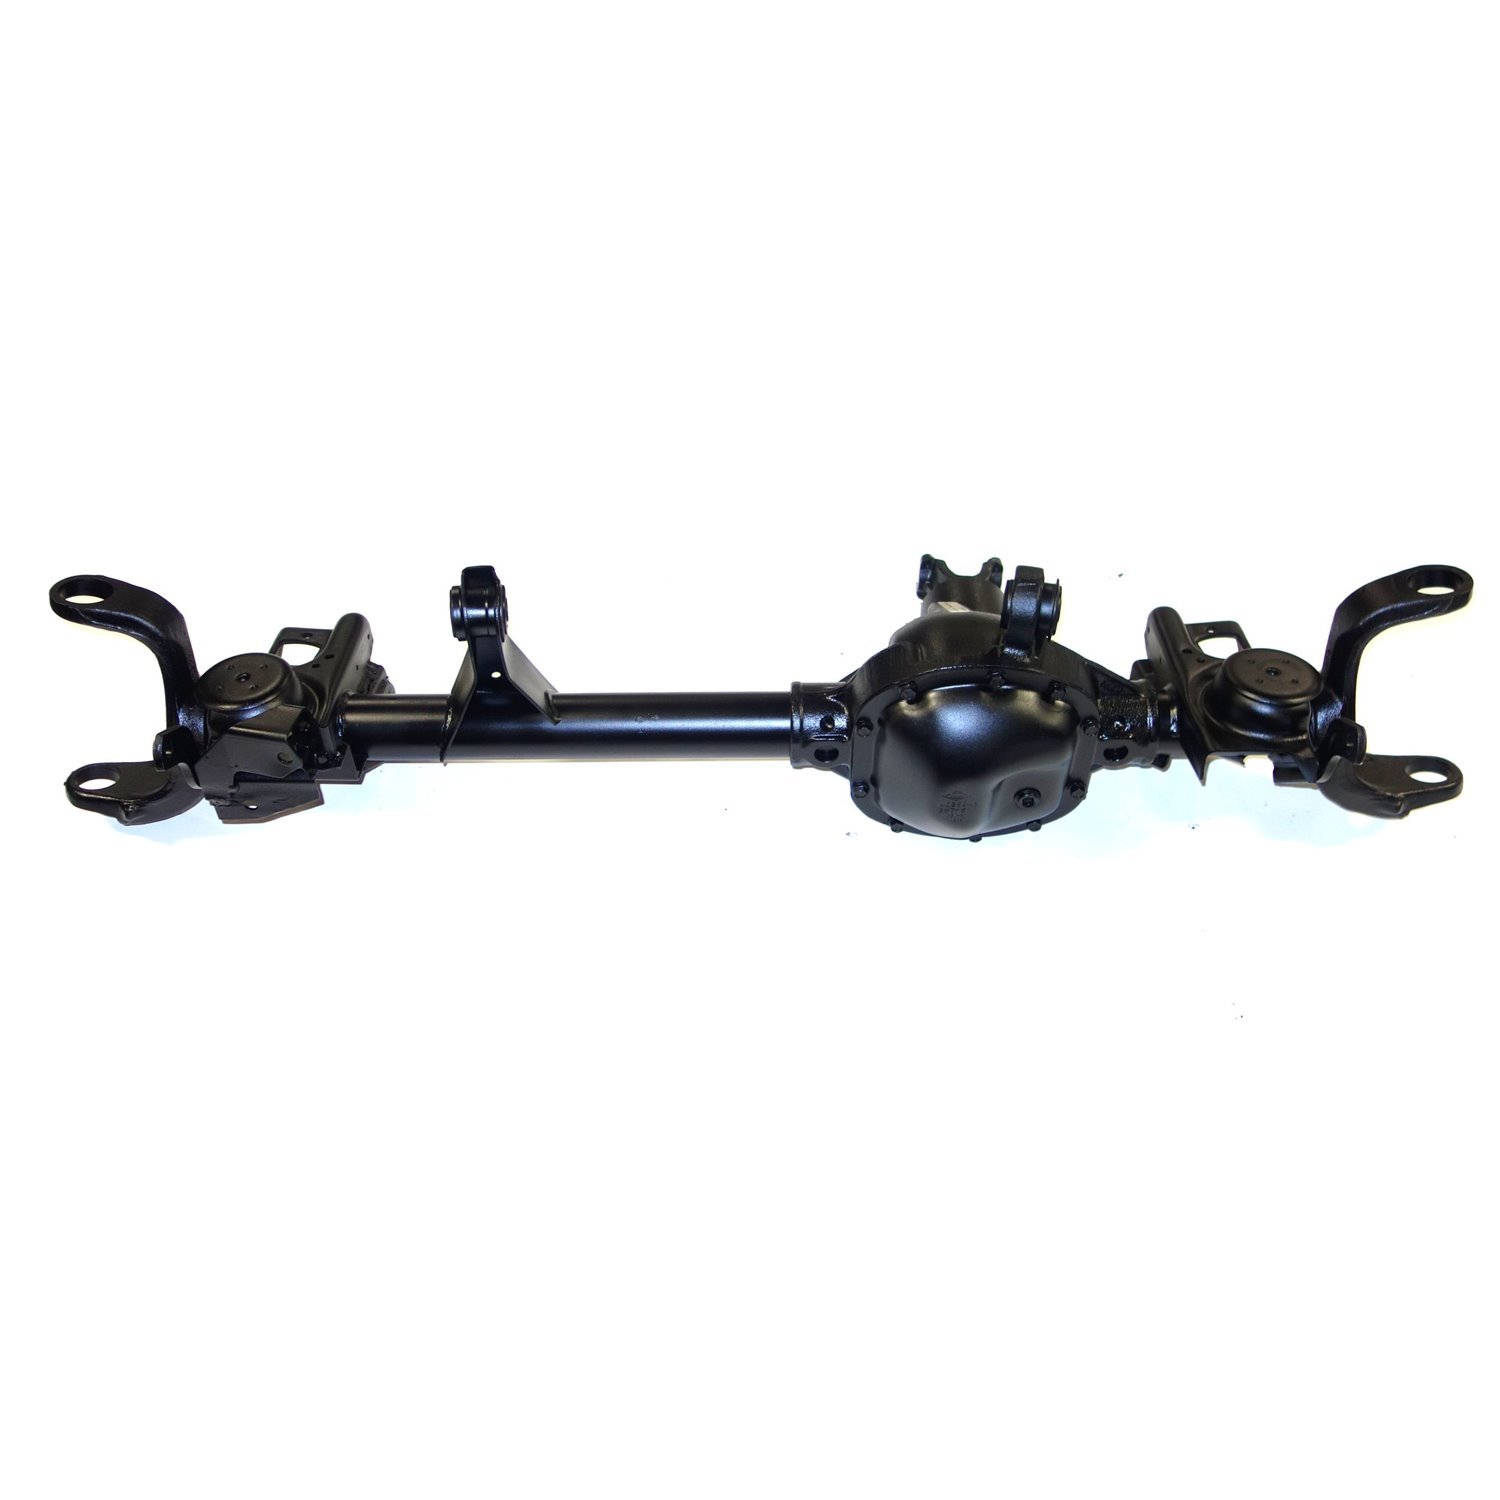 Remanufactured Complete Axle Assembly for Dana 30 90-95 Jeep Wrangler 3.07 Ratio with ABS